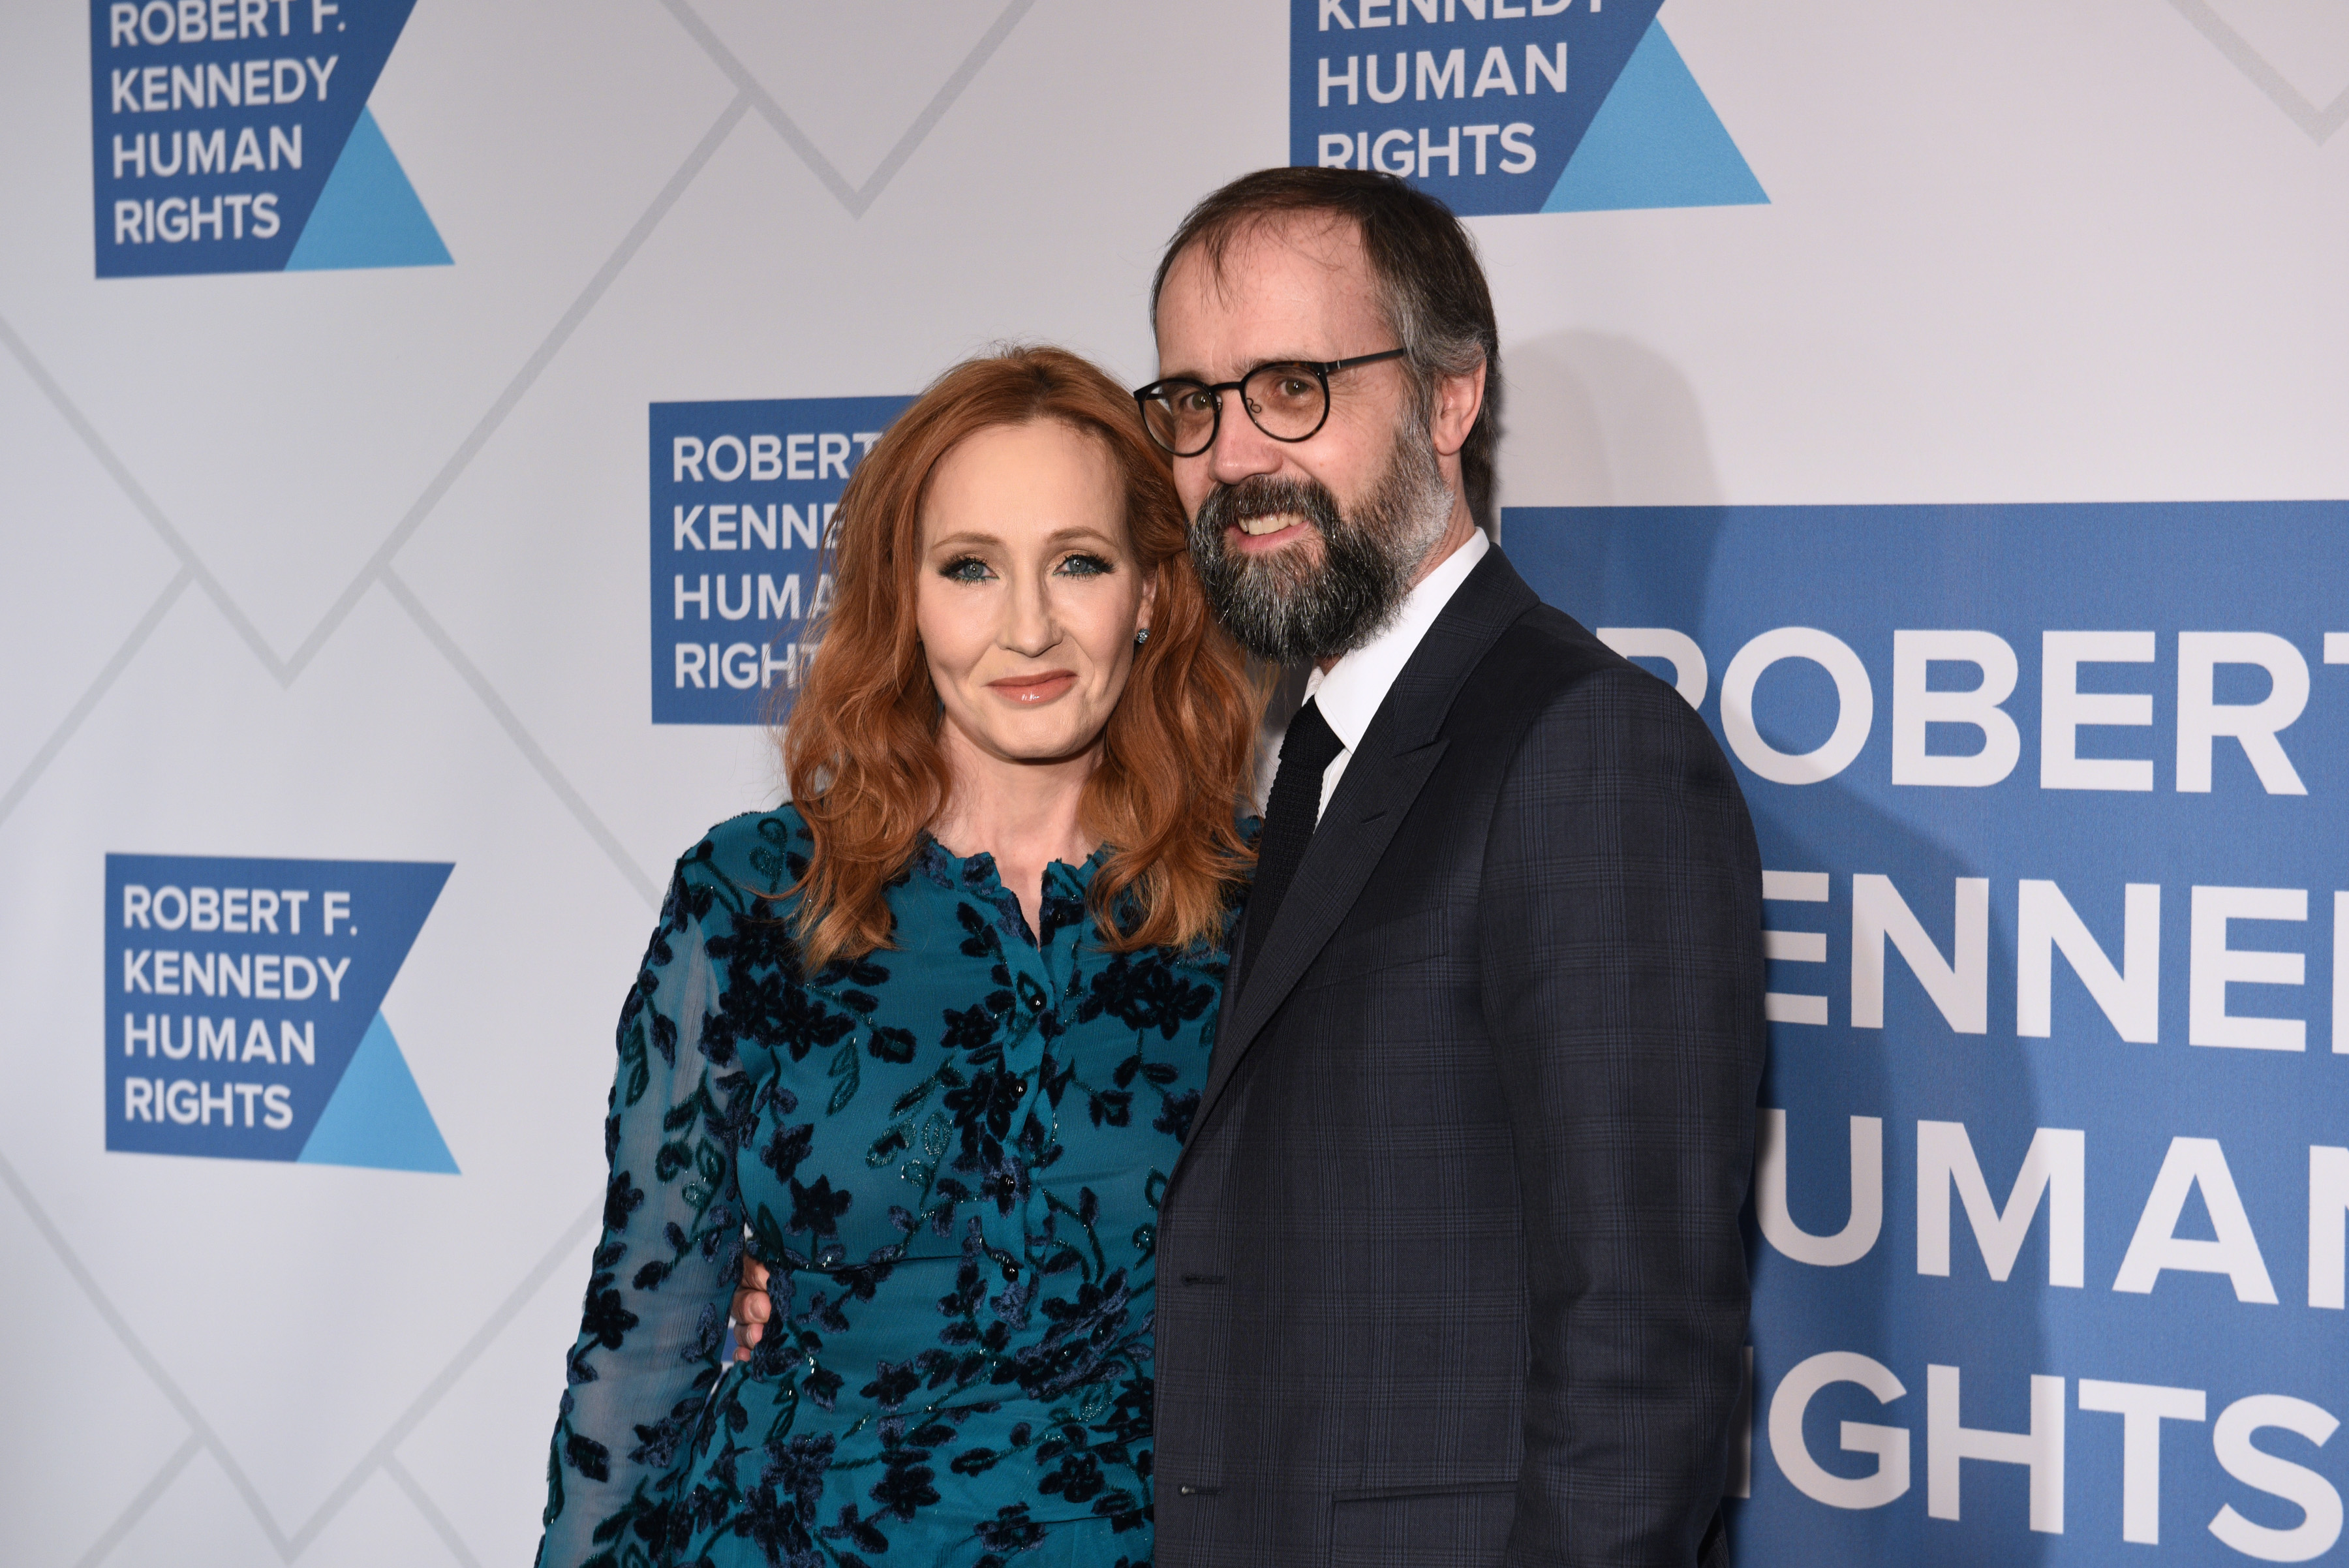 J.K. Rowling and Neil Murray attend the Robert F. Kennedy Human Rights Hosts 2019 Ripple Of Hope Gala & Auction In NYC on December 12, 2019 in New York City. | Source: Getty Images